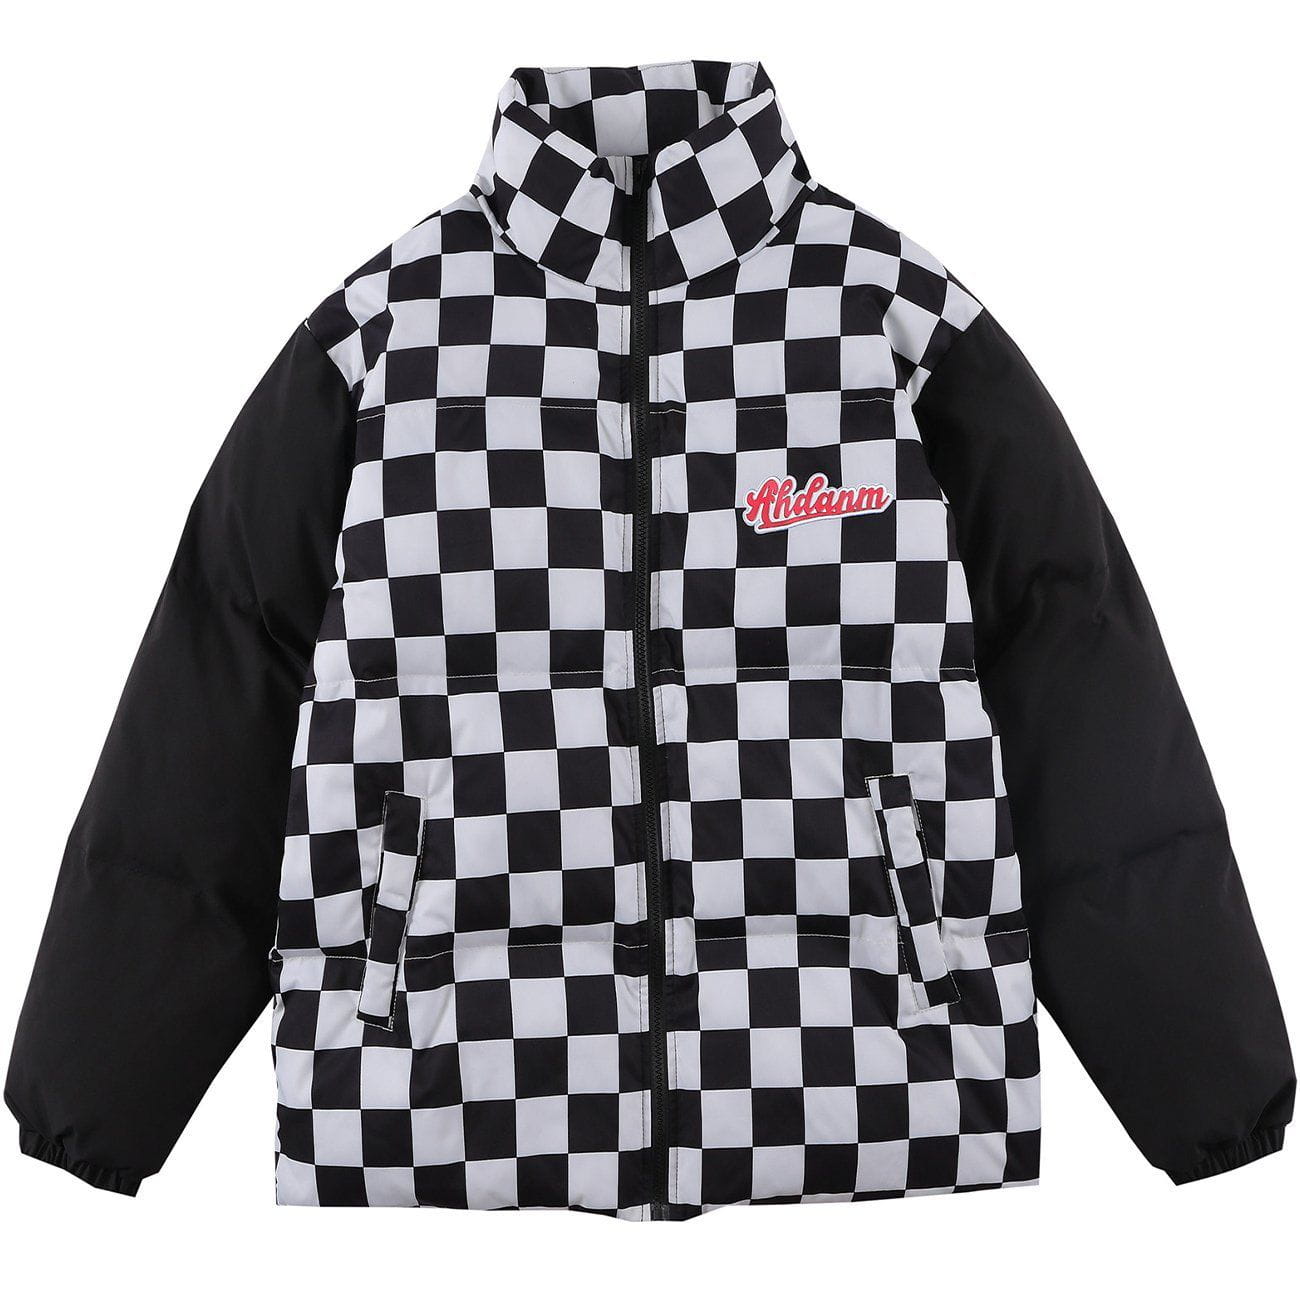 LUXENFY™ - Checkerboard Print Turtleneck Puffer Jacket luxenfy.com